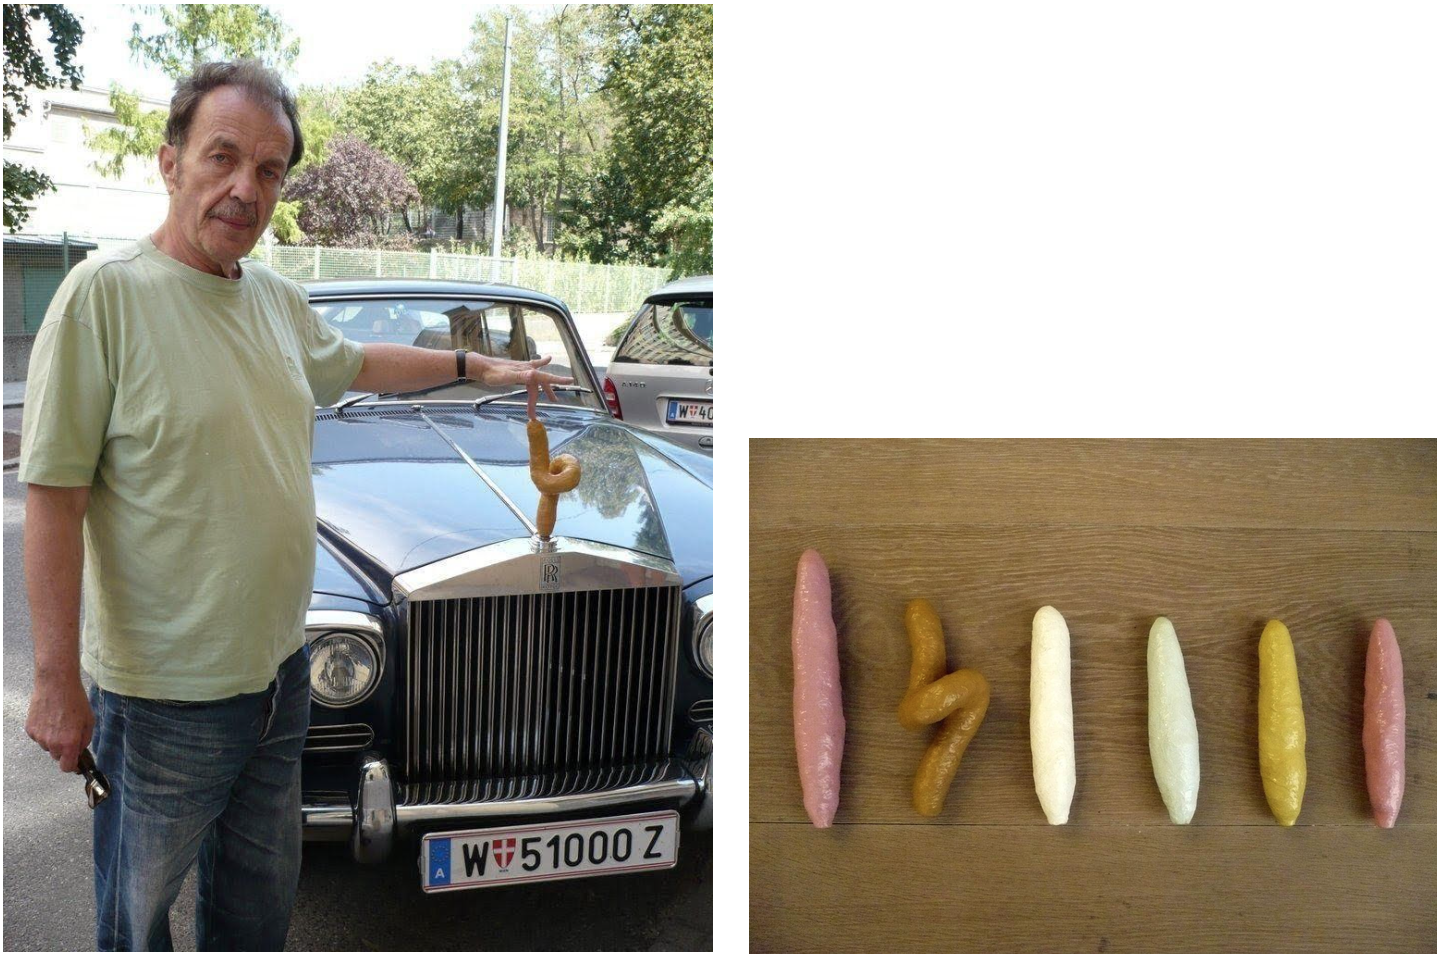 Left:&amp;nbsp;

Franz West&amp;nbsp;with&amp;nbsp;Adaptive for Rolls Royce Silver Shadow, 2007
Photo: Franz West Privatstiftung
&amp;nbsp;&amp;copy;&amp;nbsp;Archiv Franz West;&amp;nbsp;&amp;copy; Estate Franz West

The collection of Erling Kagge
Courtesy:&amp;nbsp;Archiv Franz West and Estate Franz West

&amp;nbsp;

Right:

Franz West
6 Adaptives for Rolls Royce Silver Shadow, 2007
epoxy resin, metal
Rose: 31 x 5,5 x 5,5 cm
Rose: 23 x 5 x 5 cm
Yellow: 23 x 5 x 5 cm
White: 24,5 x 5 x 5 cm
Turquoise: 23 x 6 x 6 cm
Brown: 24 x 10 x 10 cm
&amp;nbsp;&amp;copy;&amp;nbsp;Archiv Franz West,&amp;nbsp;&amp;copy; Estate of Franz West
Photo: Franz West Privatstiftung

The collection of Erling Kagge
Courtesy:&amp;nbsp;Archiv Franz West and Estate of Franz West

&amp;nbsp;